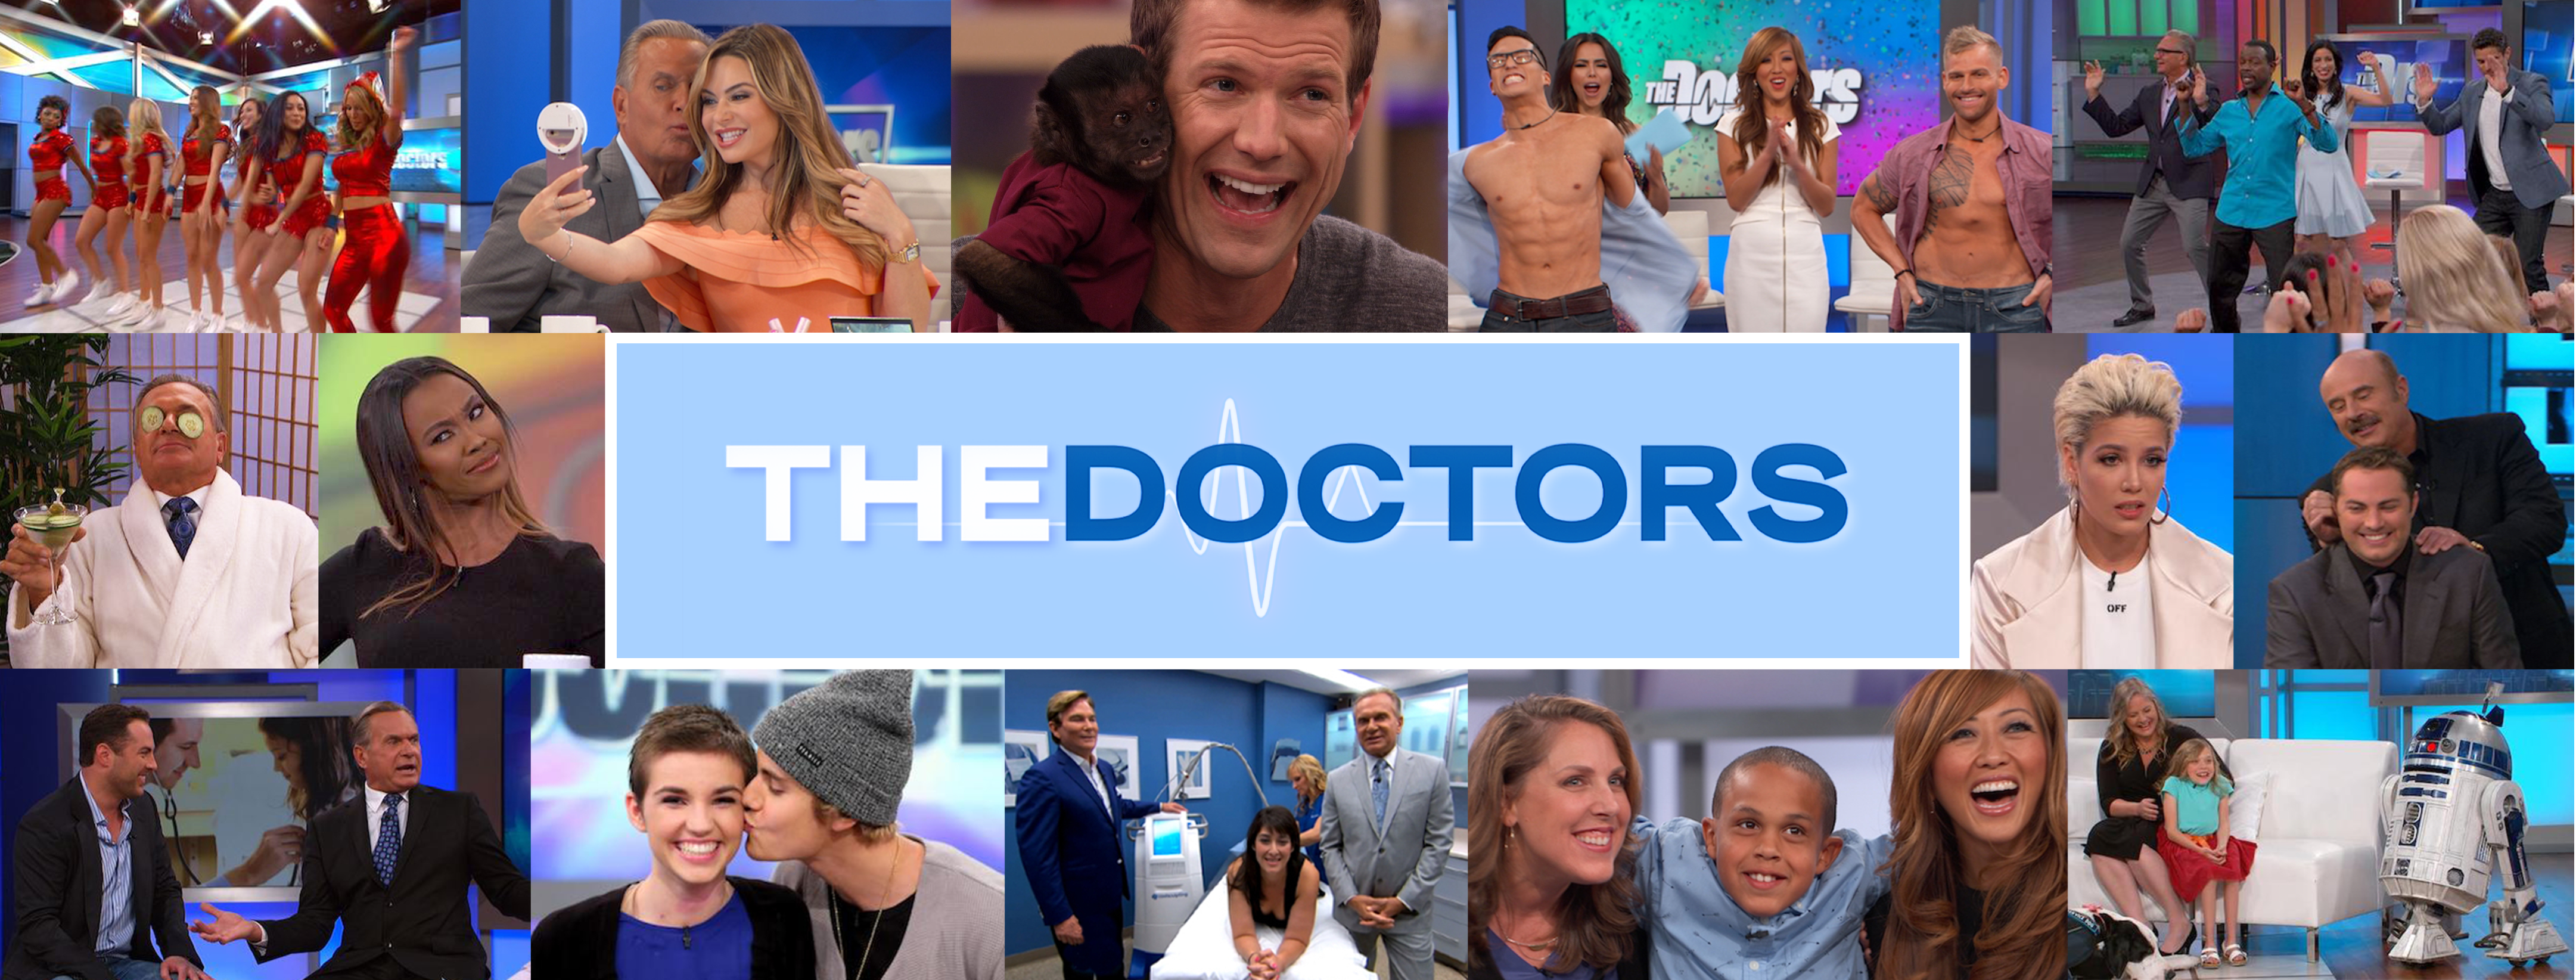 Woman Burned With Acid By Ex Returns The Doctors Tv Show